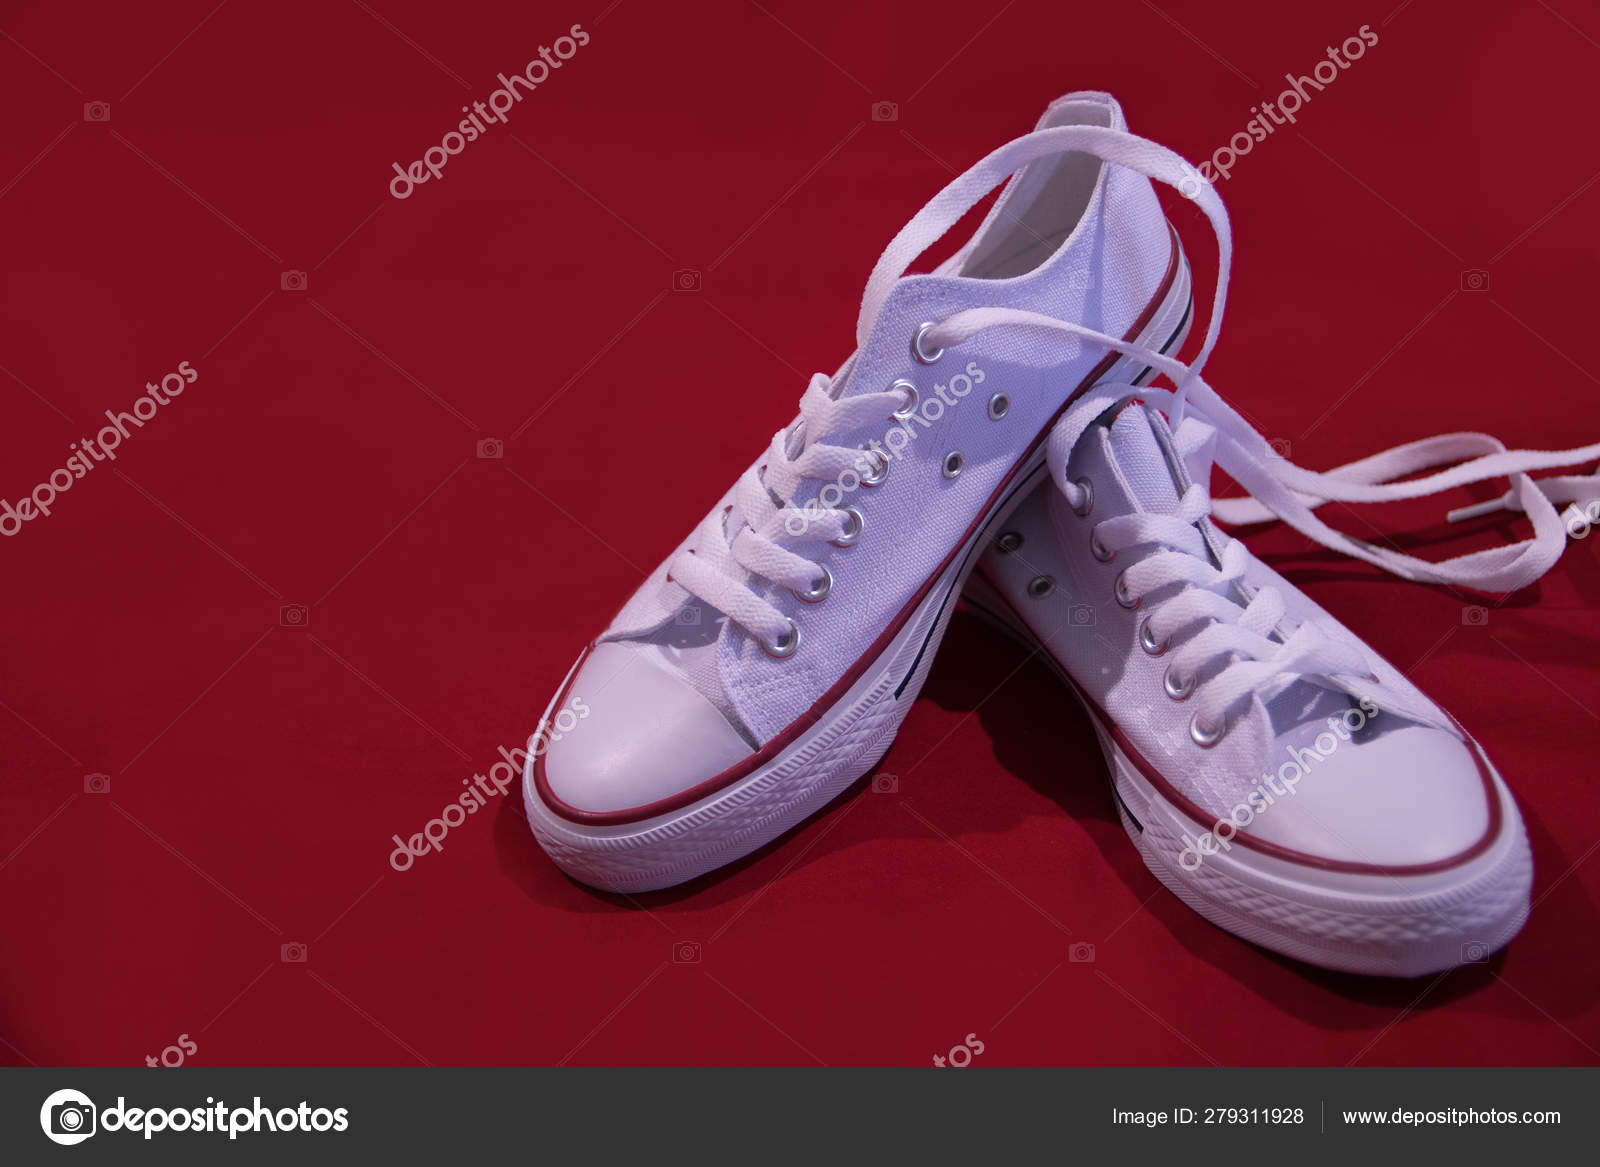 White keds with laces on a red 